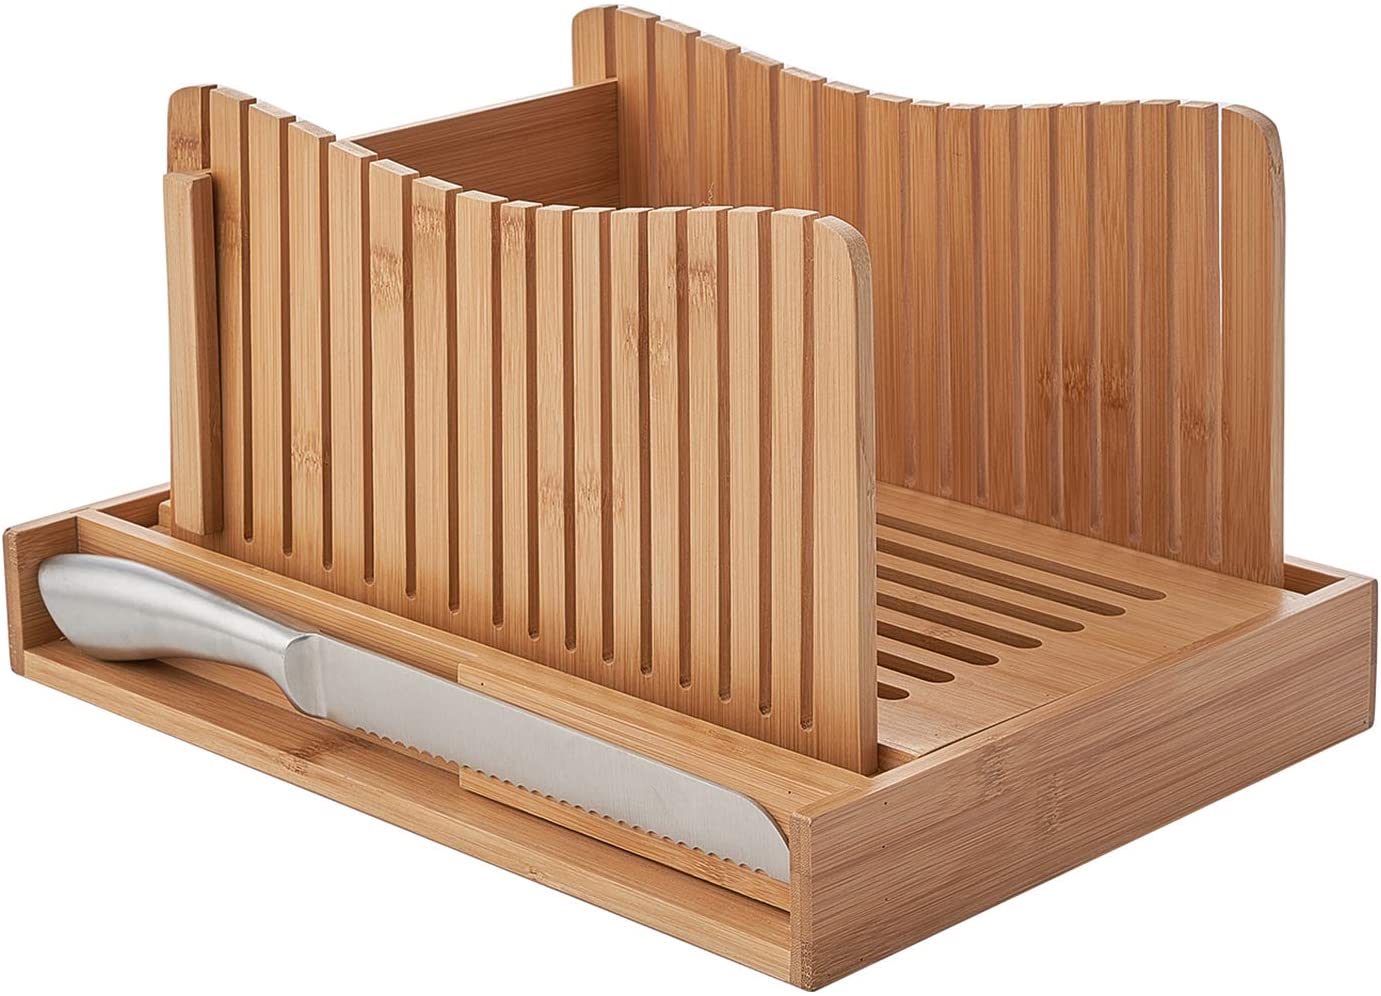 https://www.wideopencountry.com/wp-content/uploads/sites/4/eats/2021/05/COMELLOW-Bamboo-Bread-Slicer-with-3-Different-Size-Slices-Wooden-Bread-Slicer-with-Crumb-Tray-and-Knife-Adjustable-Bread-Slicing-Guide-for-Homemade-Bread.jpg?resize=1381%2C996